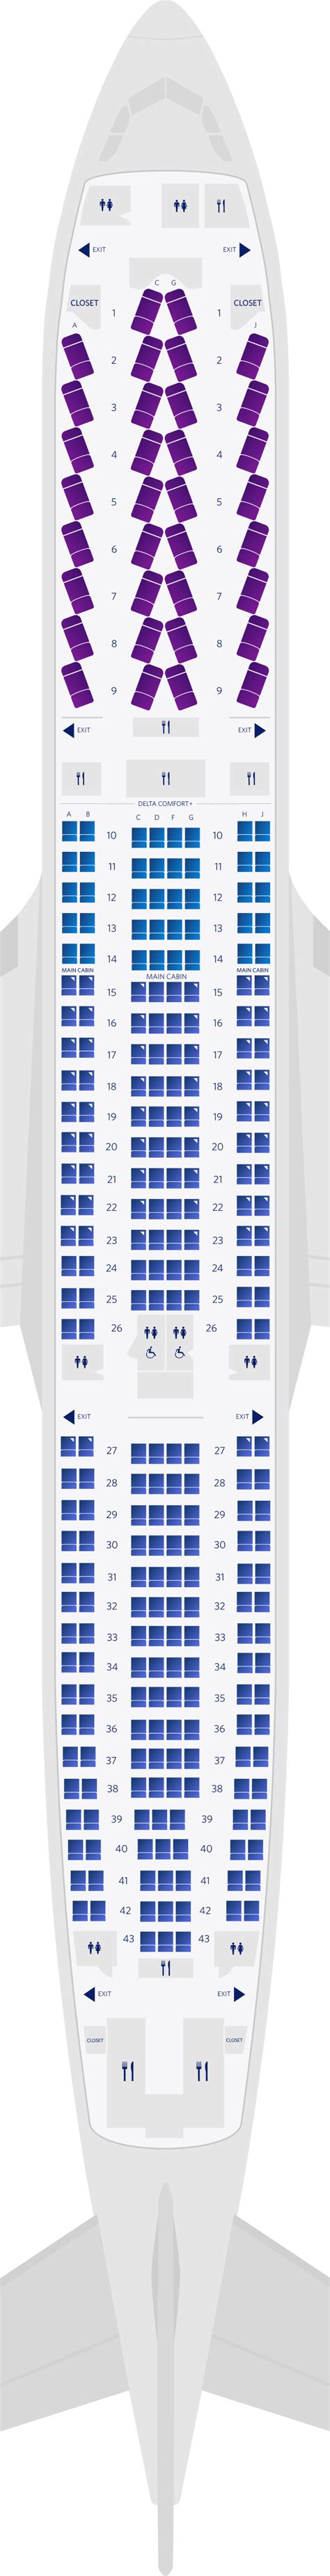 Delta Airplane Seating Map Elcho Table